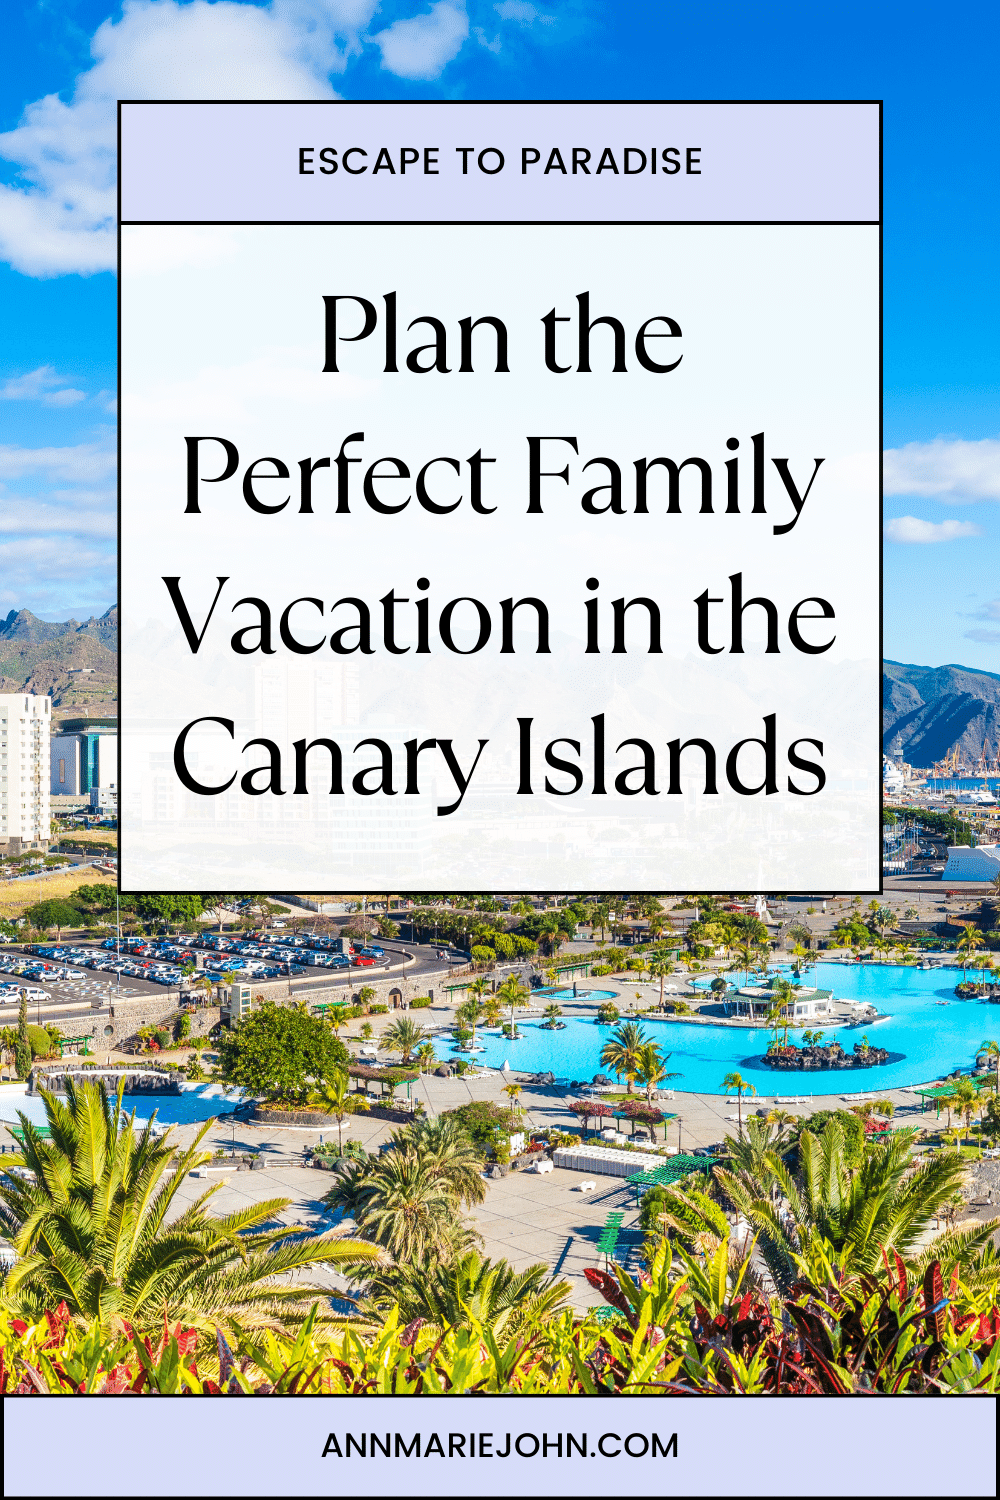 Plan the Perfect Family Vacation in the Canary Islands